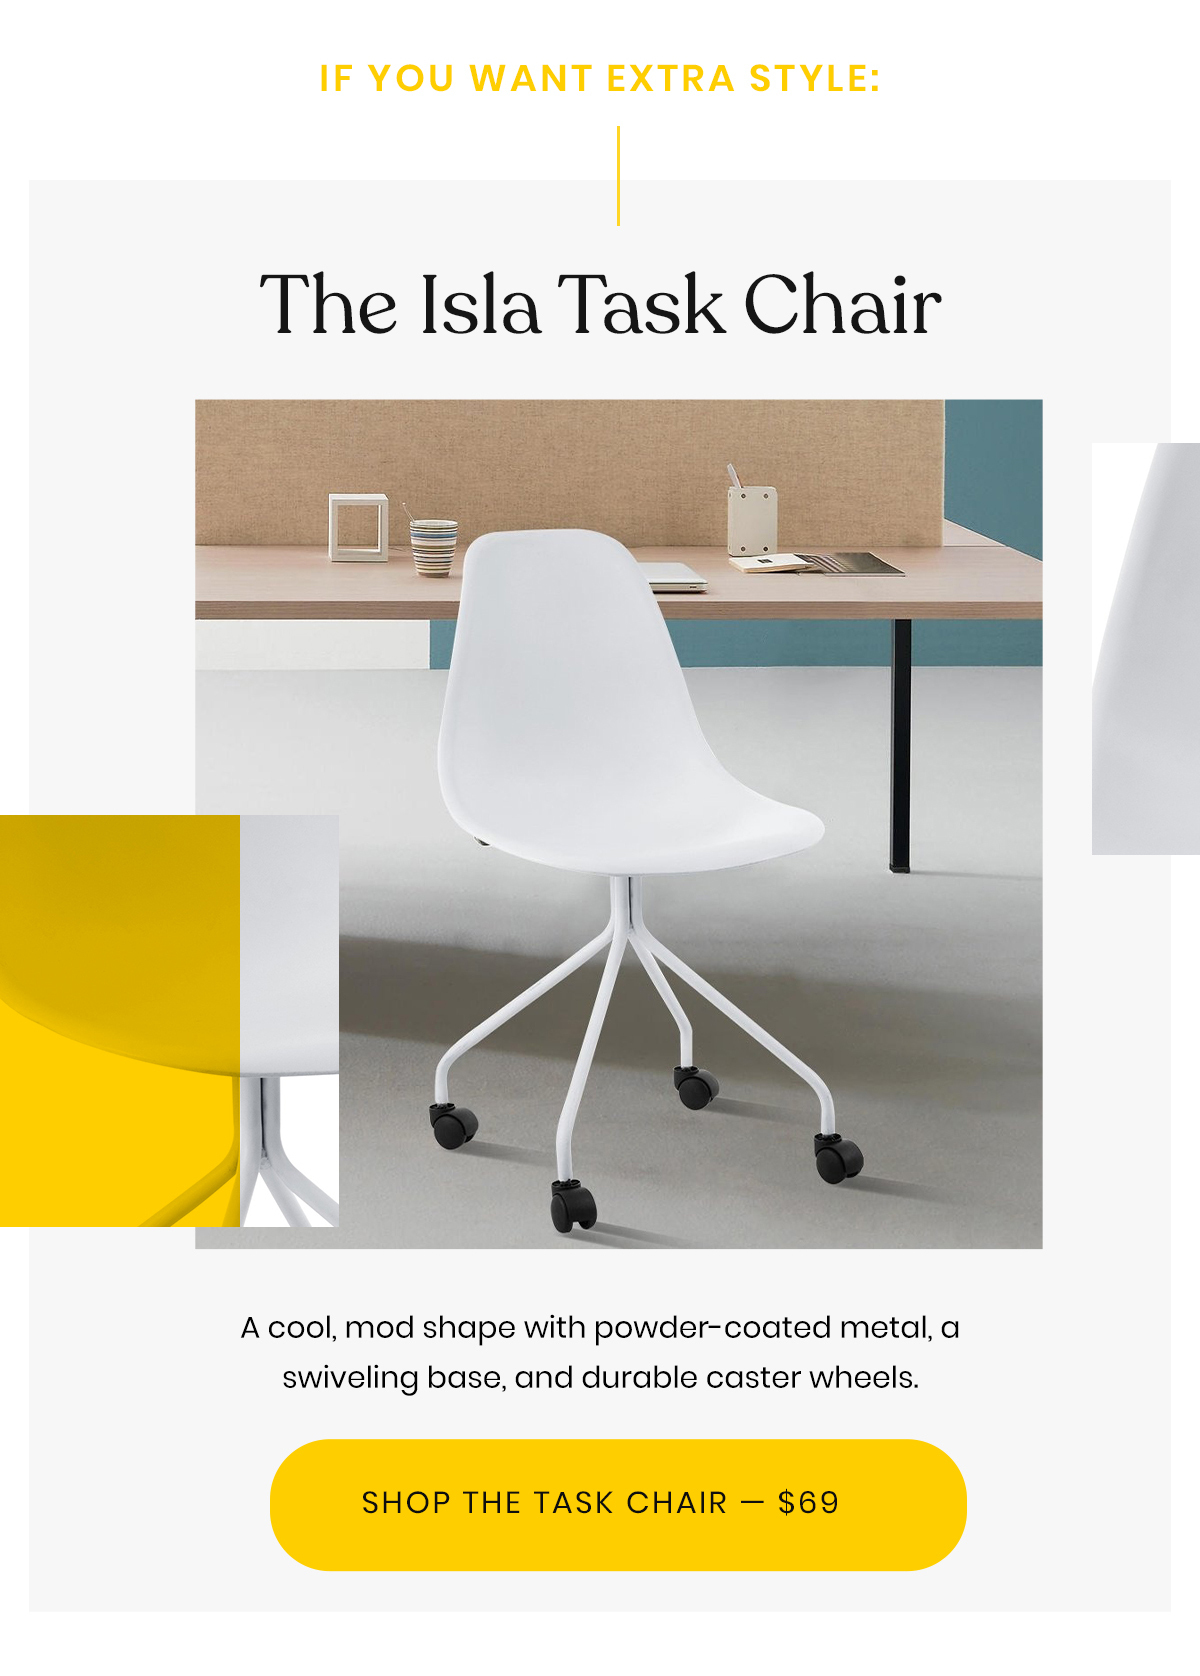 If You Want Extra Style: The Isla Task Chair | A cool, mod shape with powder-coated metal, a swiveling base, and durable caster wheels. | Shop The Task Chair - $69